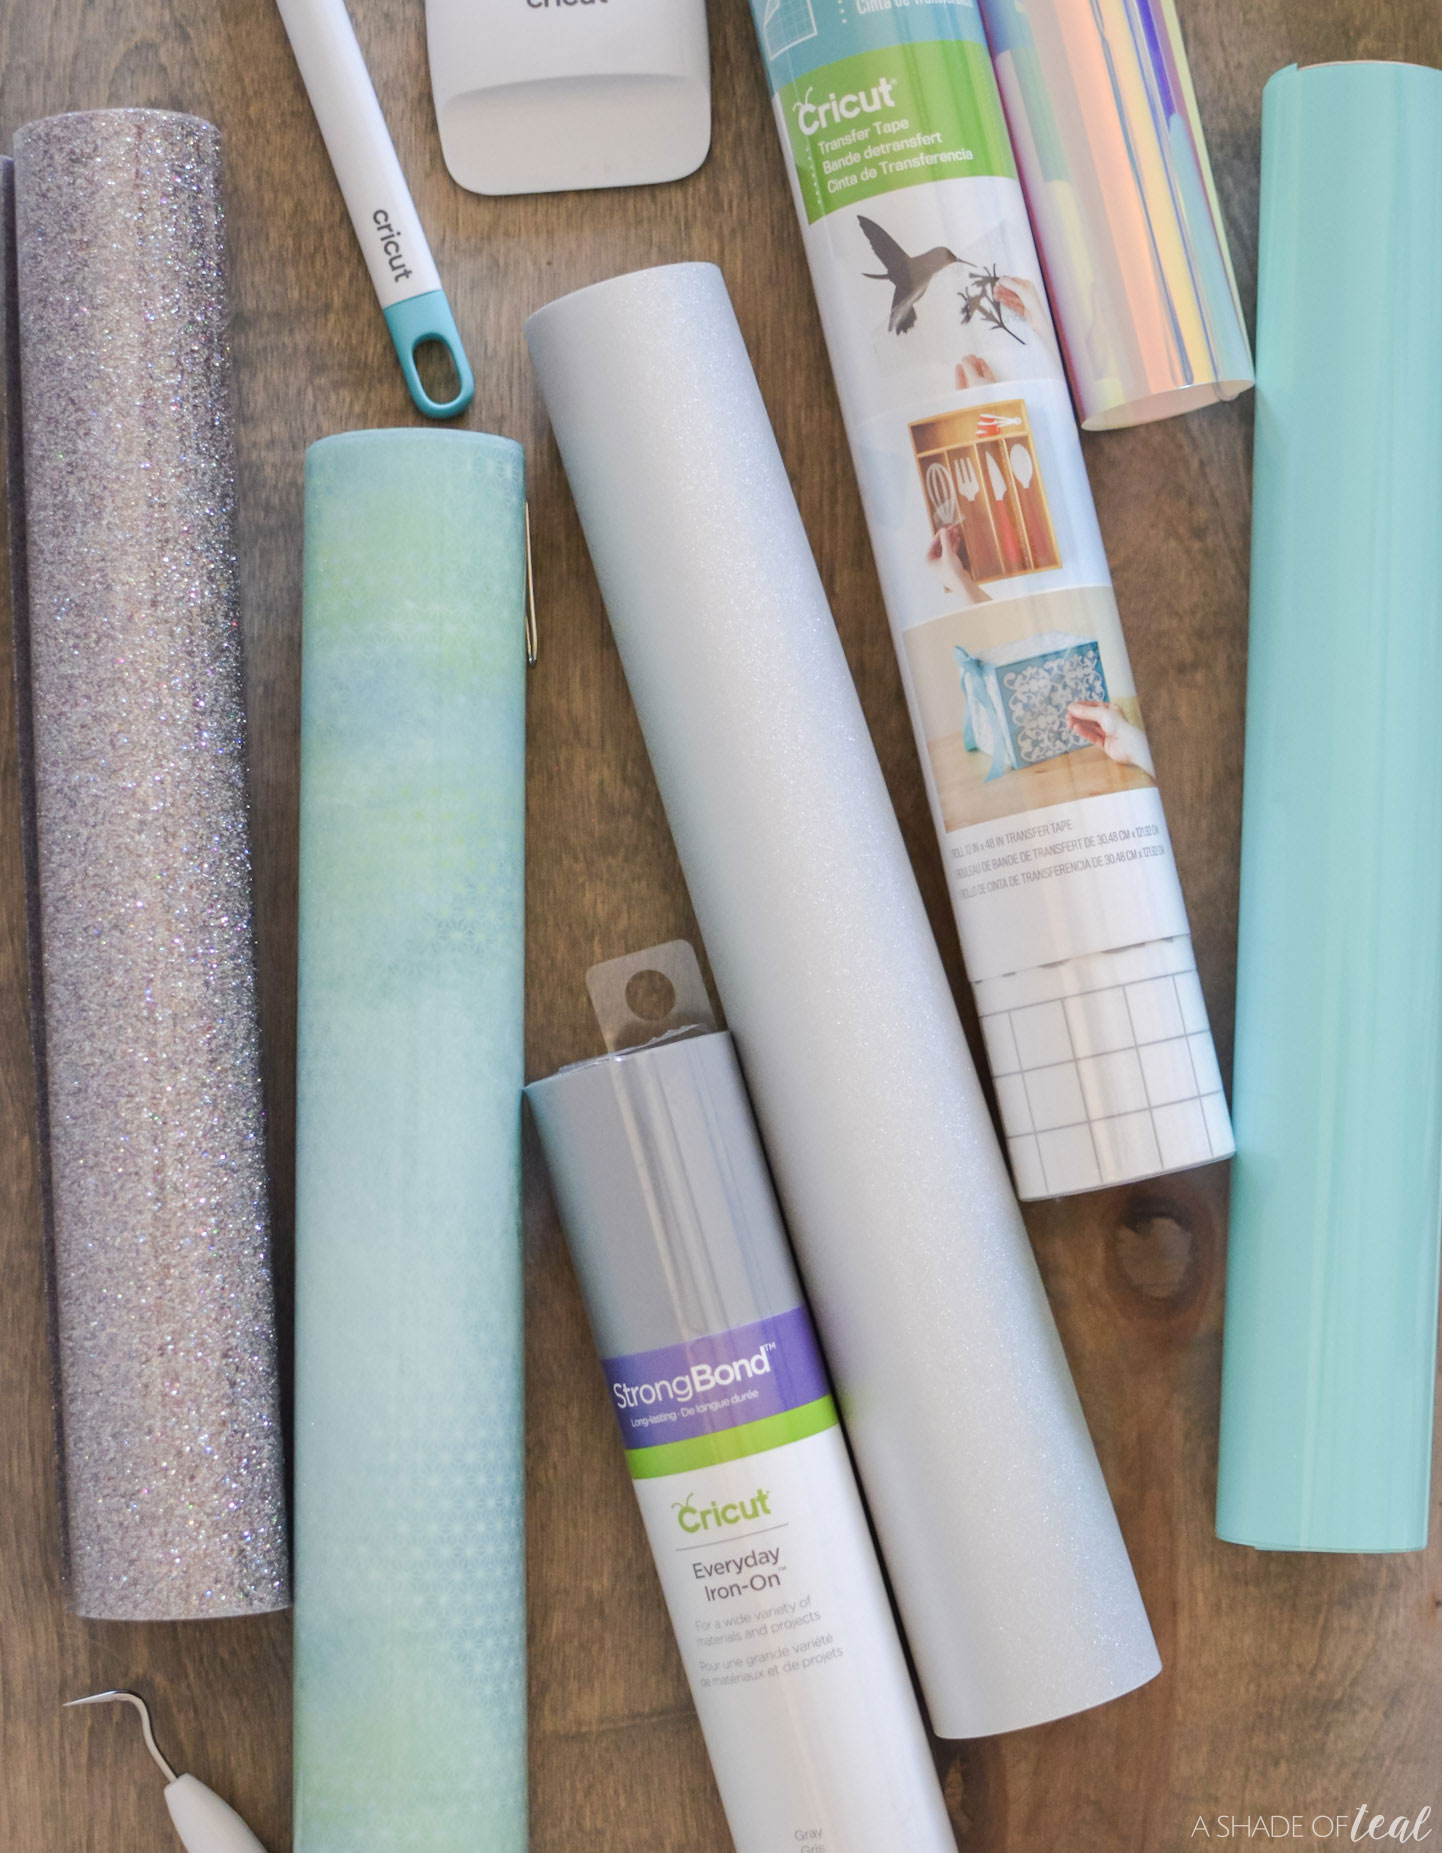 Cricut - Did you know there are two different types of Cricut Transfer Tape?  Our Standard Grip Transfer Tape is perfect for our Premium Vinyls -  Removable and Permanent and most other